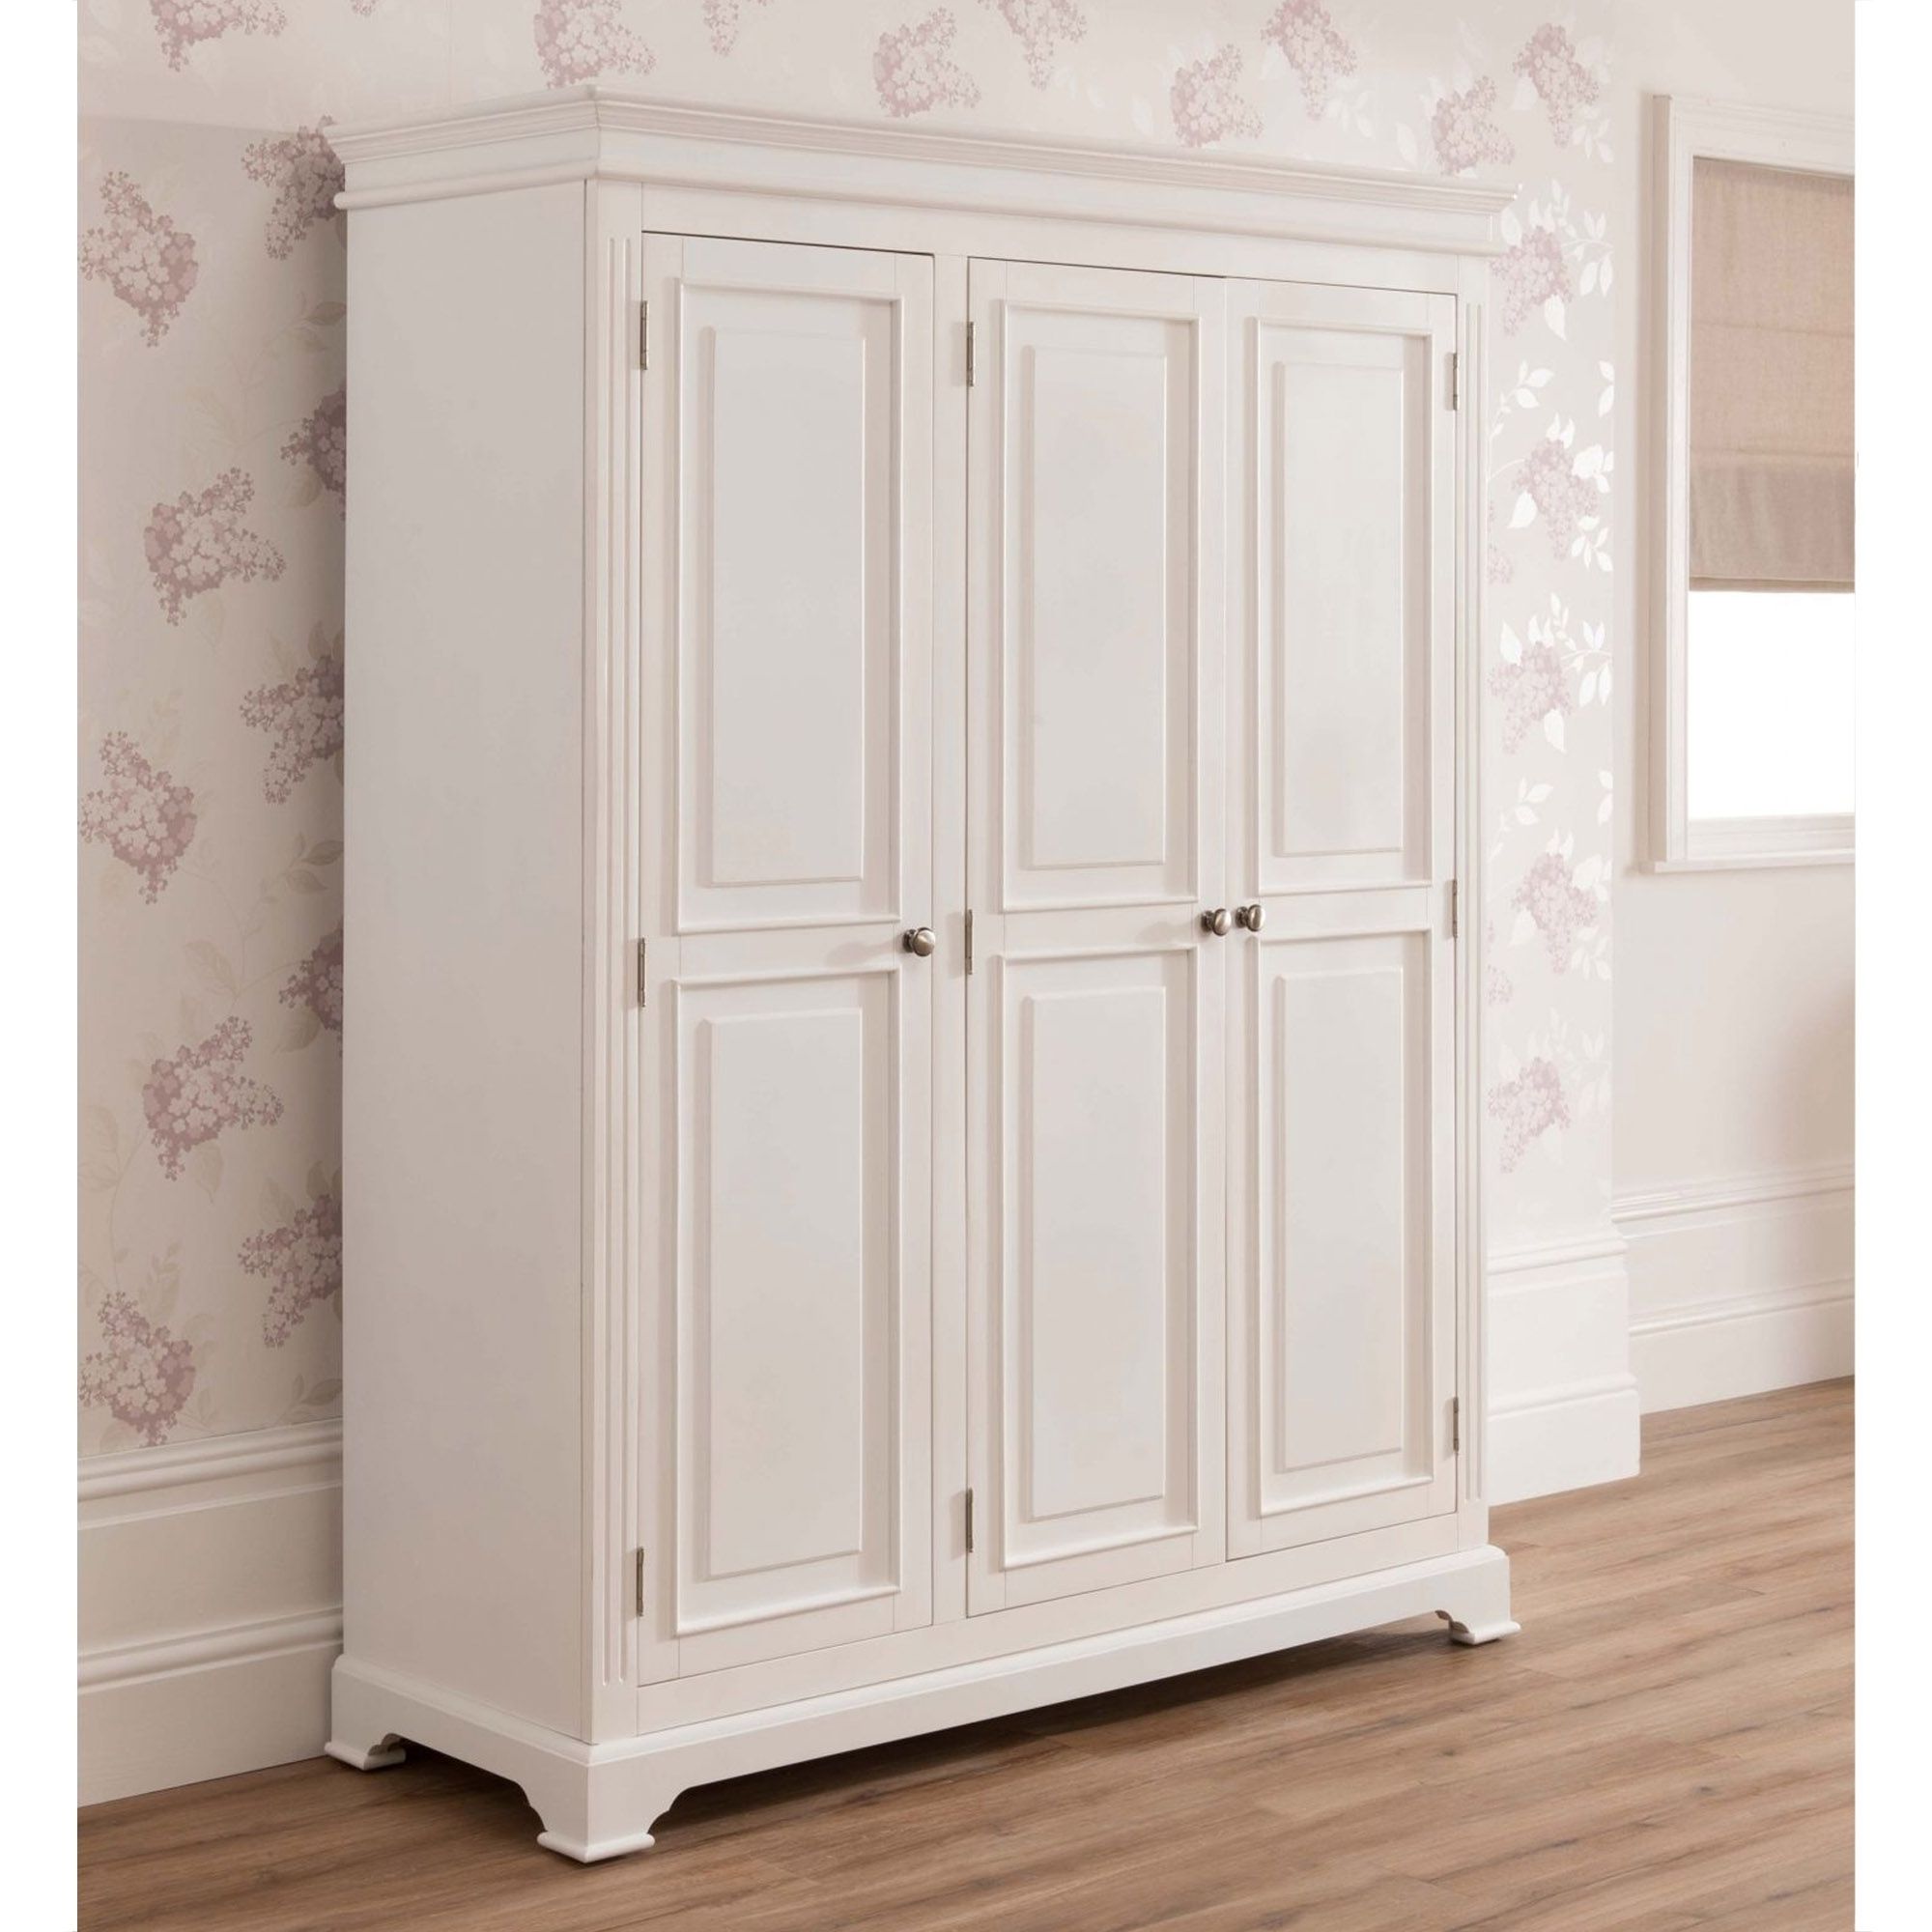 Sophia Shabby Chic Wardrobe Is A Fantastic Addition To Our Antique French  Furniture Inside Chic Wardrobes (View 3 of 20)